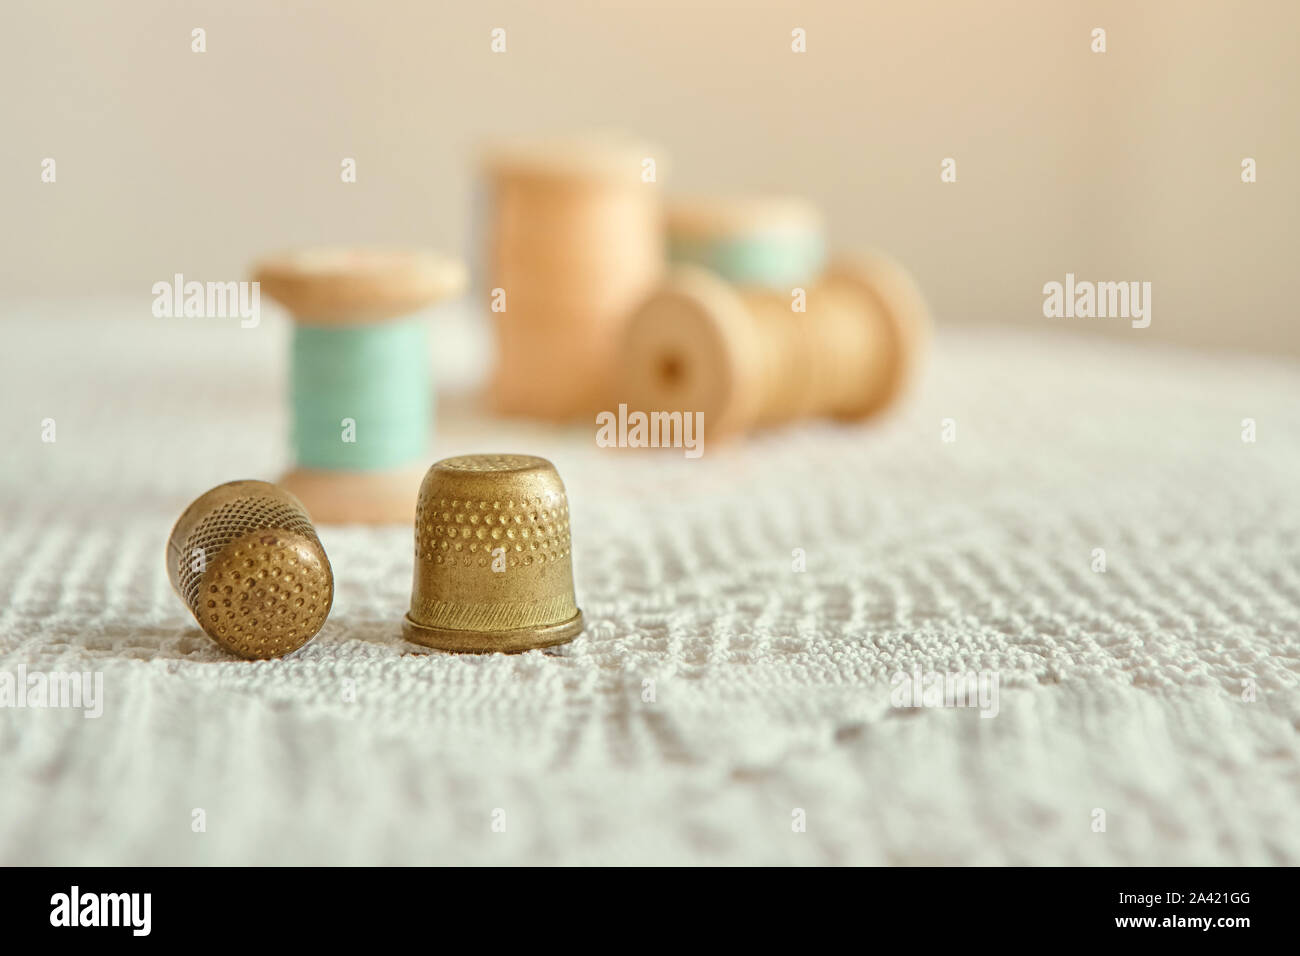 The Girl Holds A Needle And Two Thimbles In Her Hands Vintage Thimble Sewing  Against The Background Of Pink And White Fabric Stock Photo - Download  Image Now - iStock